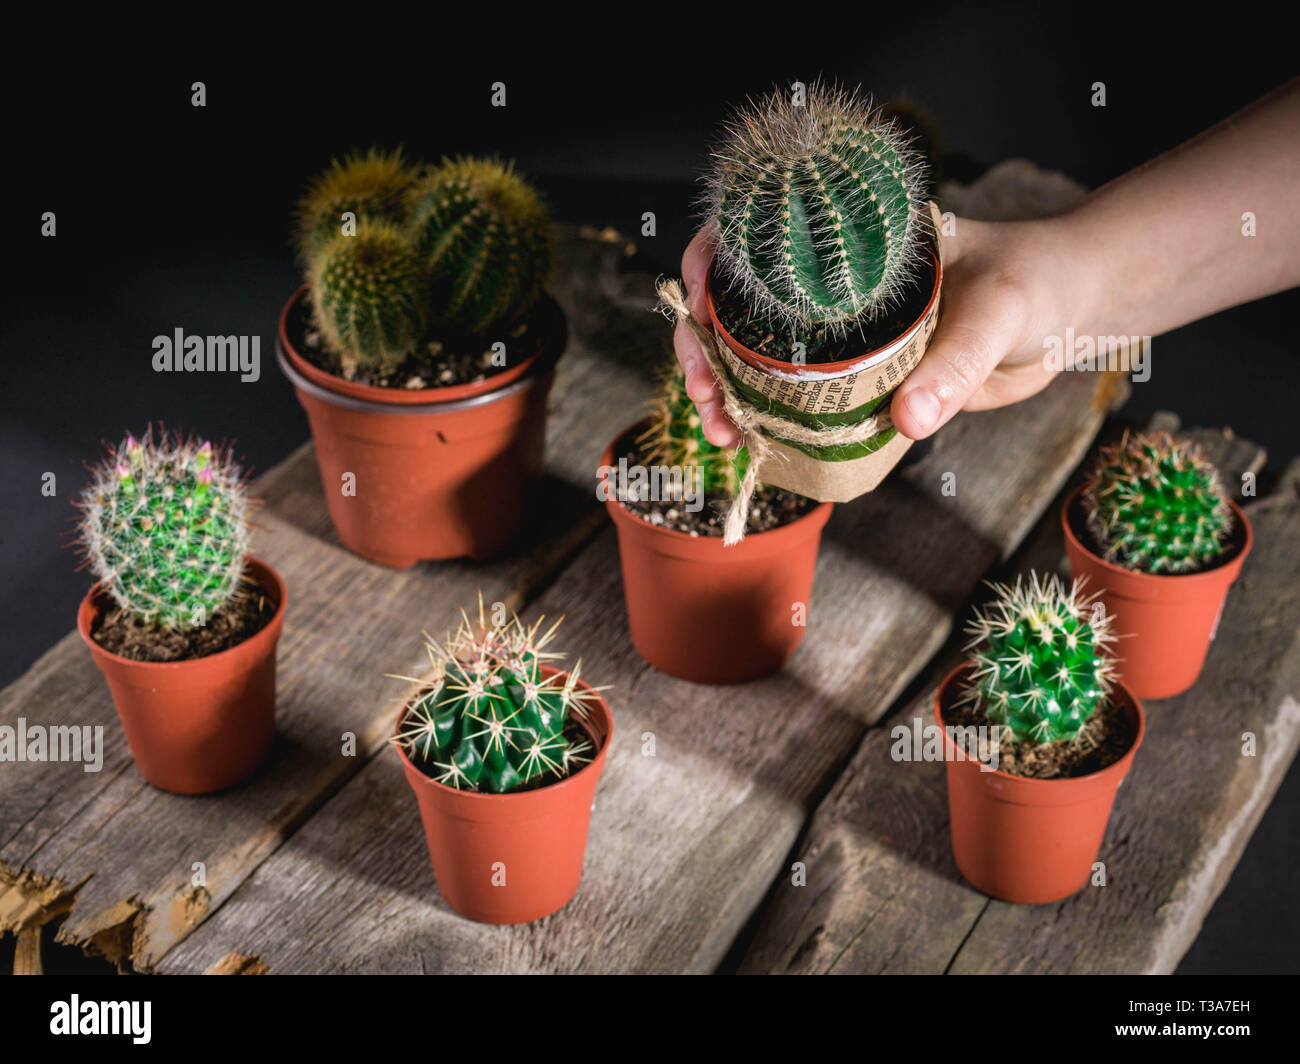 Children's hand holds a cactus. Cacti collection on dark background. Low key lighting Stock Photo